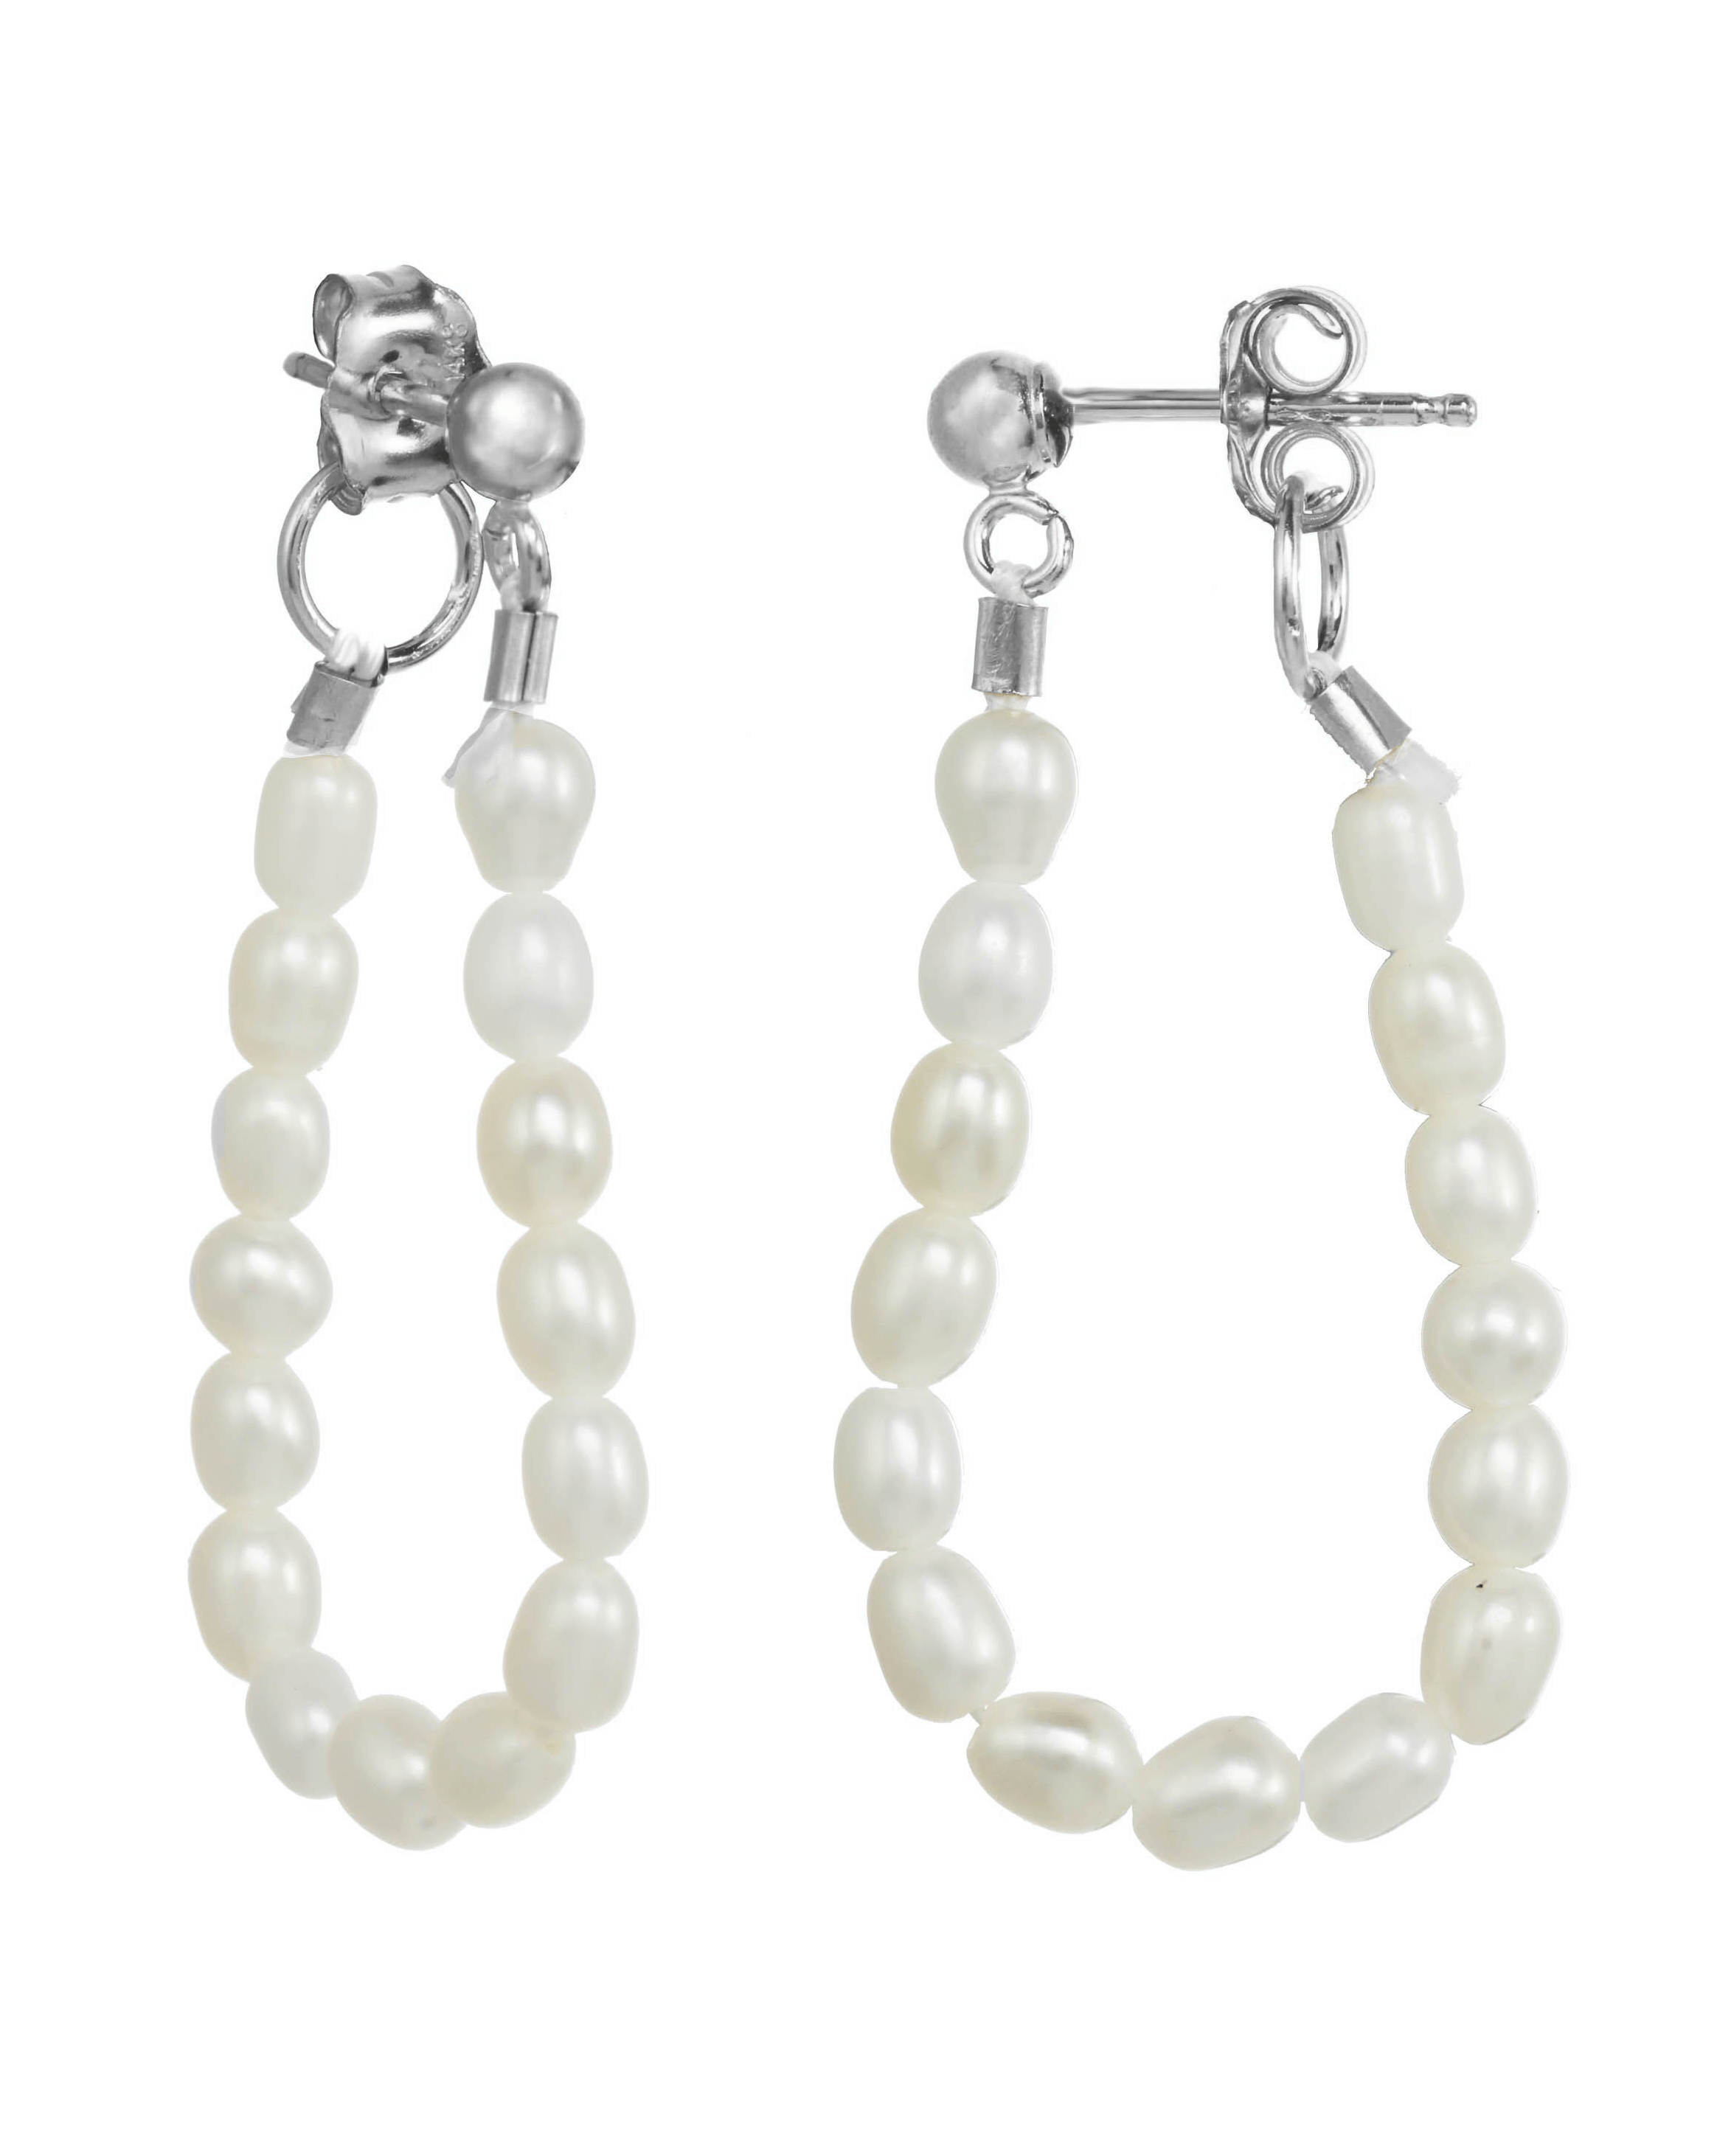 Dream Earrings by Kozakh. 3mm ball earring stud, crafted in Sterling Silver, featuring a 1 inch drop length of 3mm white Rice Pearls.